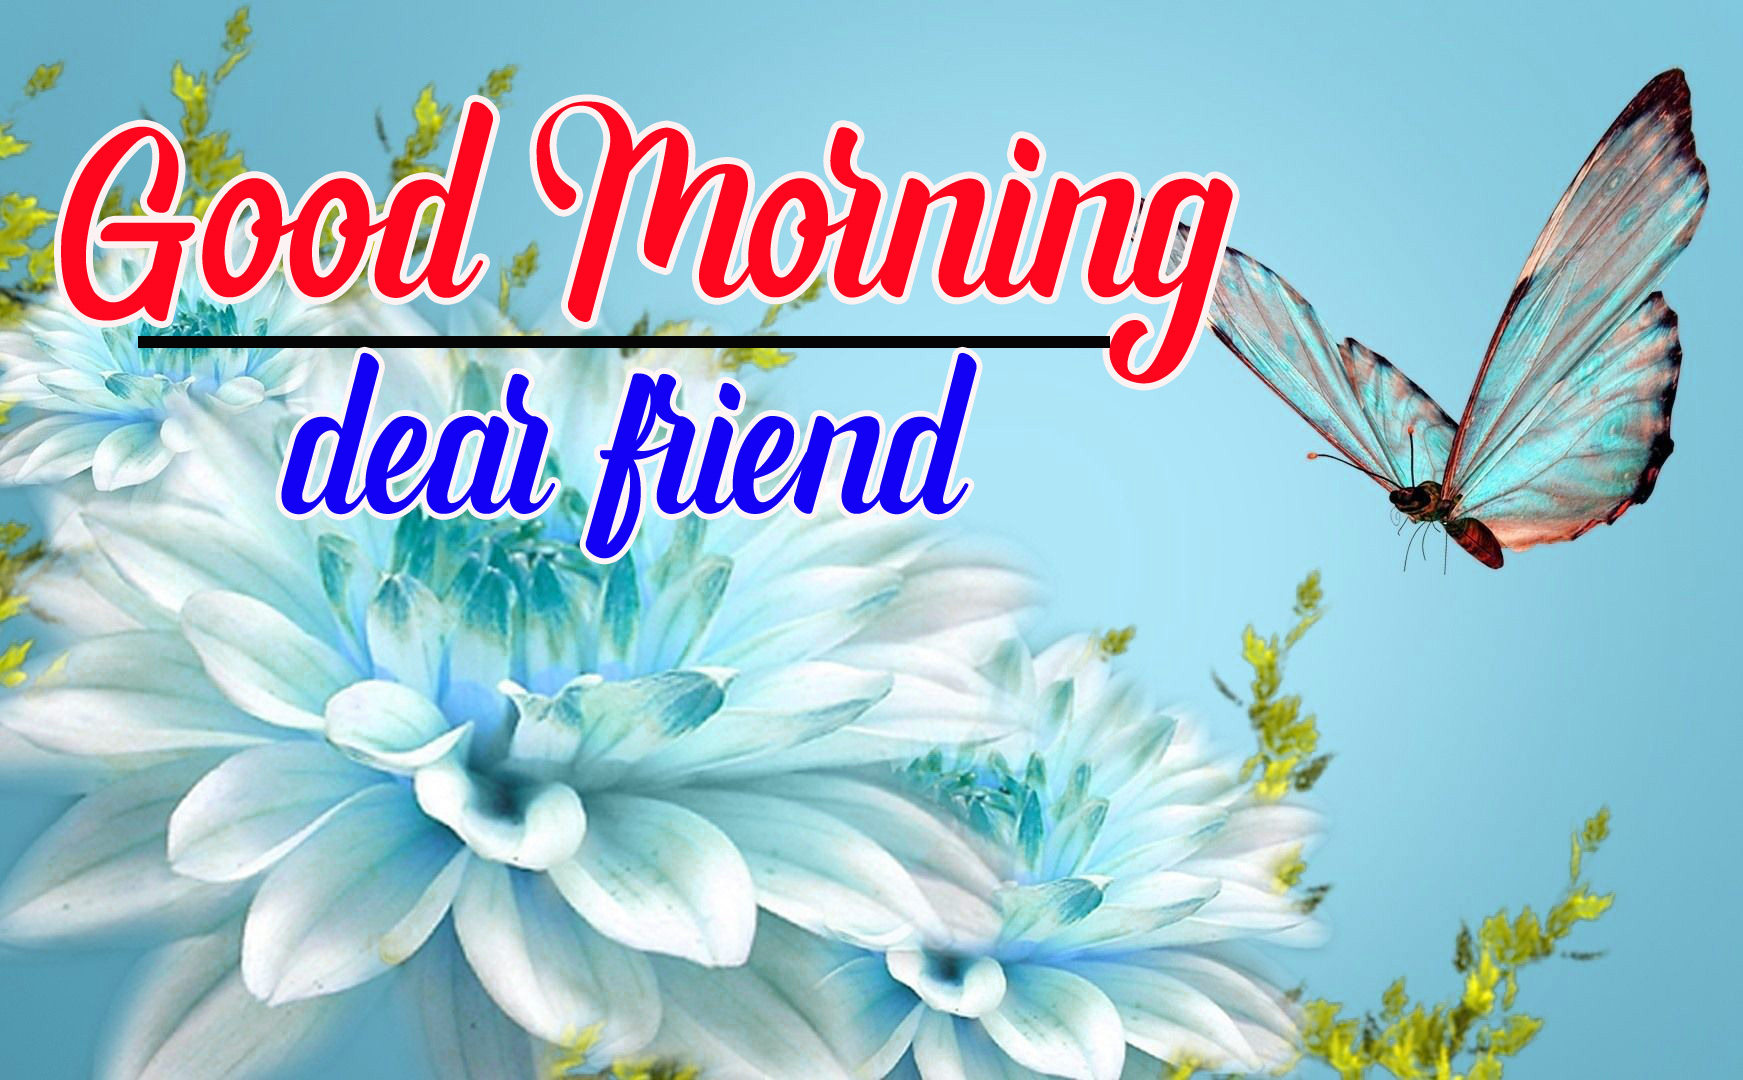 1080p Good Morning Images Pics for Friend 